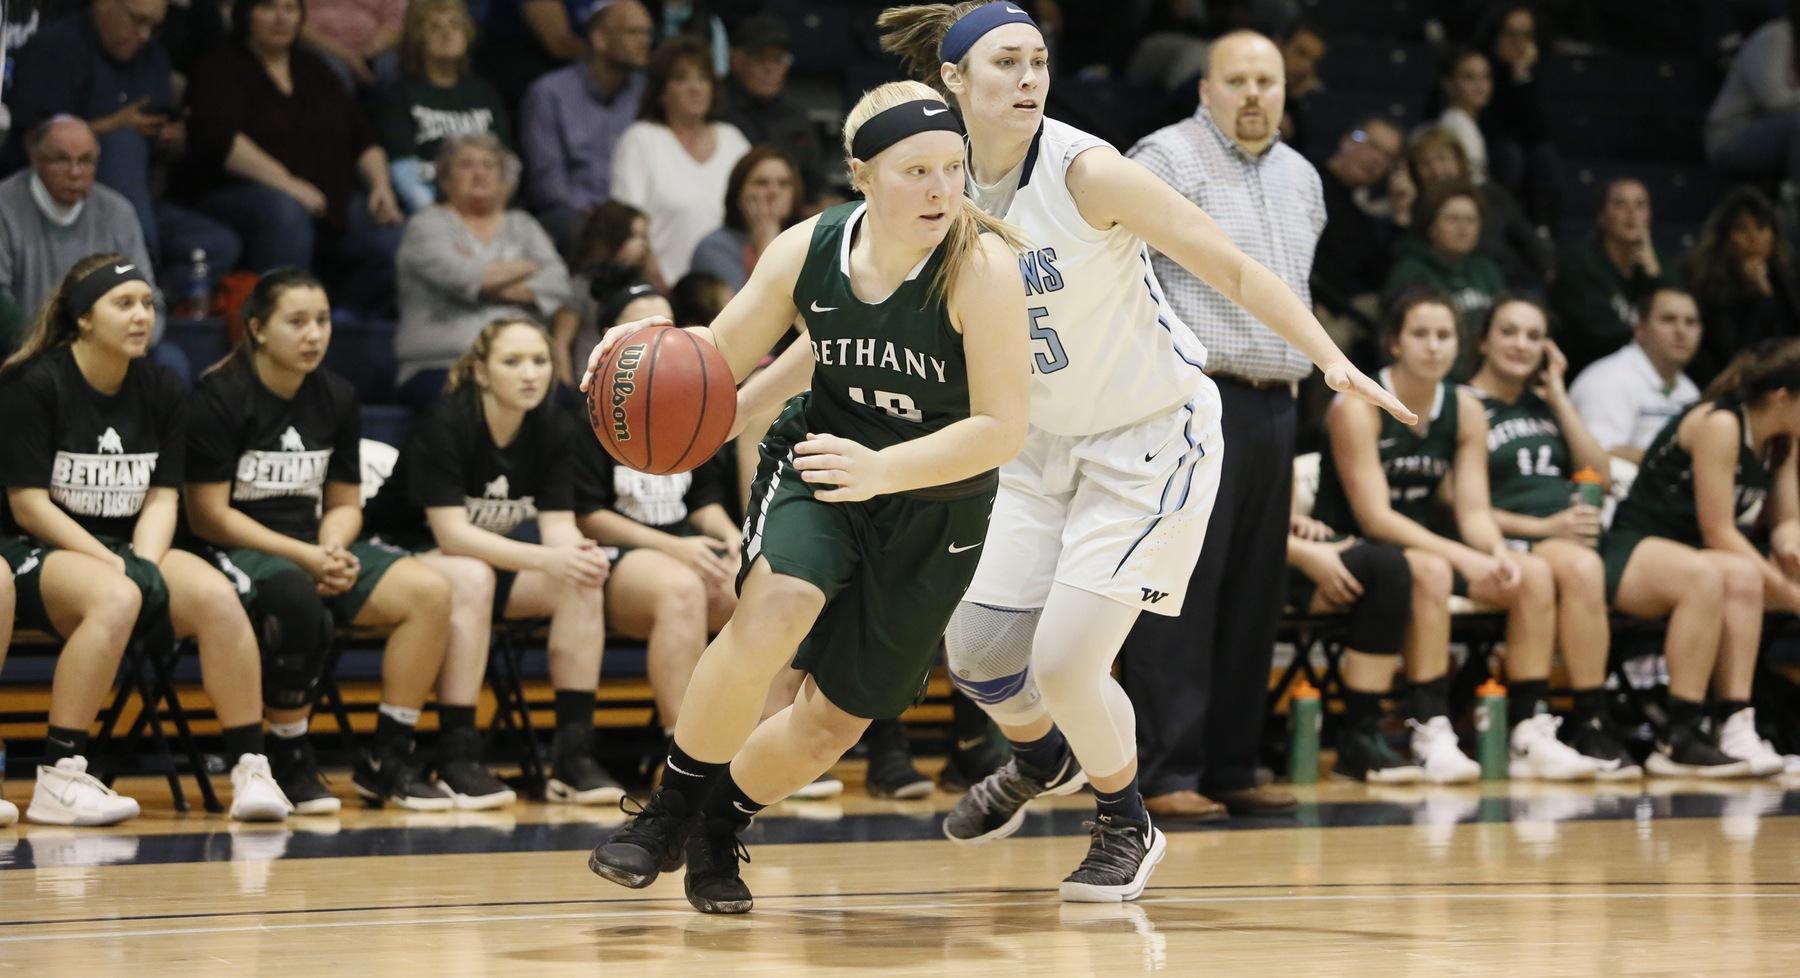 Bethany races past Allegheny, 74-53